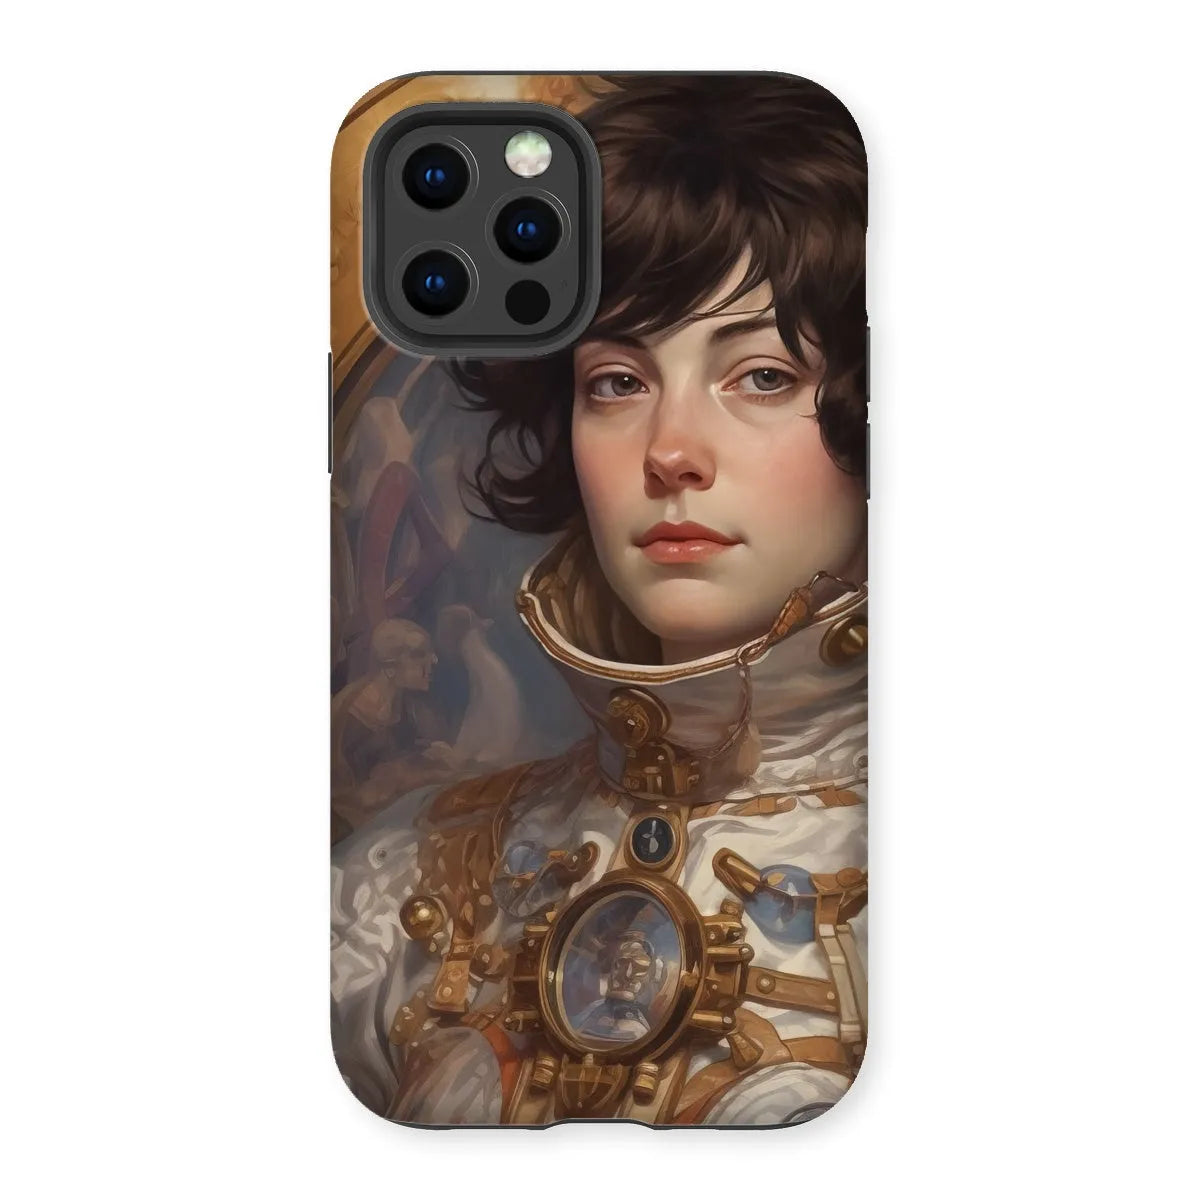 Chloé The Lesbian Astronaut - Space Aesthetic Art Phone Case - Iphone 12 Pro / Matte - Mobile Phone Cases - Aesthetic